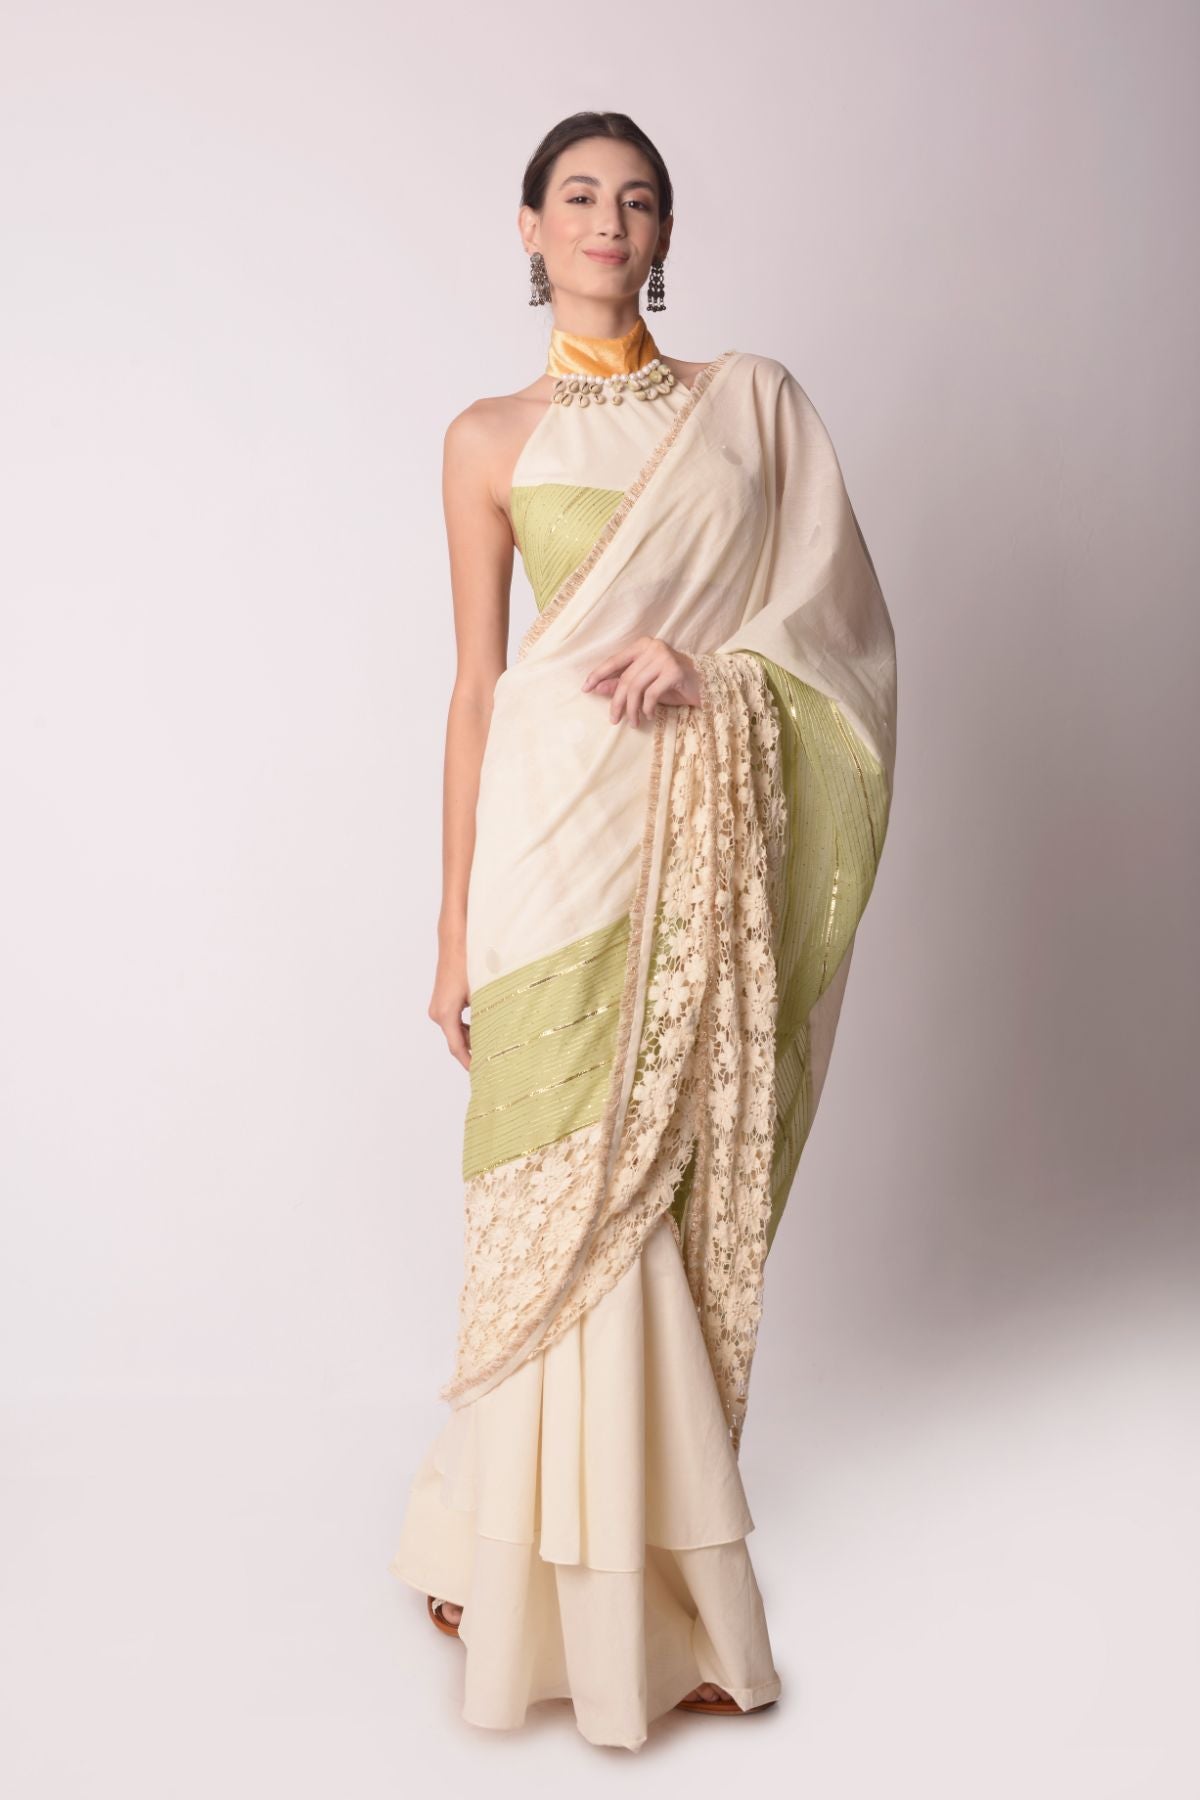 Layered Drape Saree With Patchwork Halter Tie-up Blouse